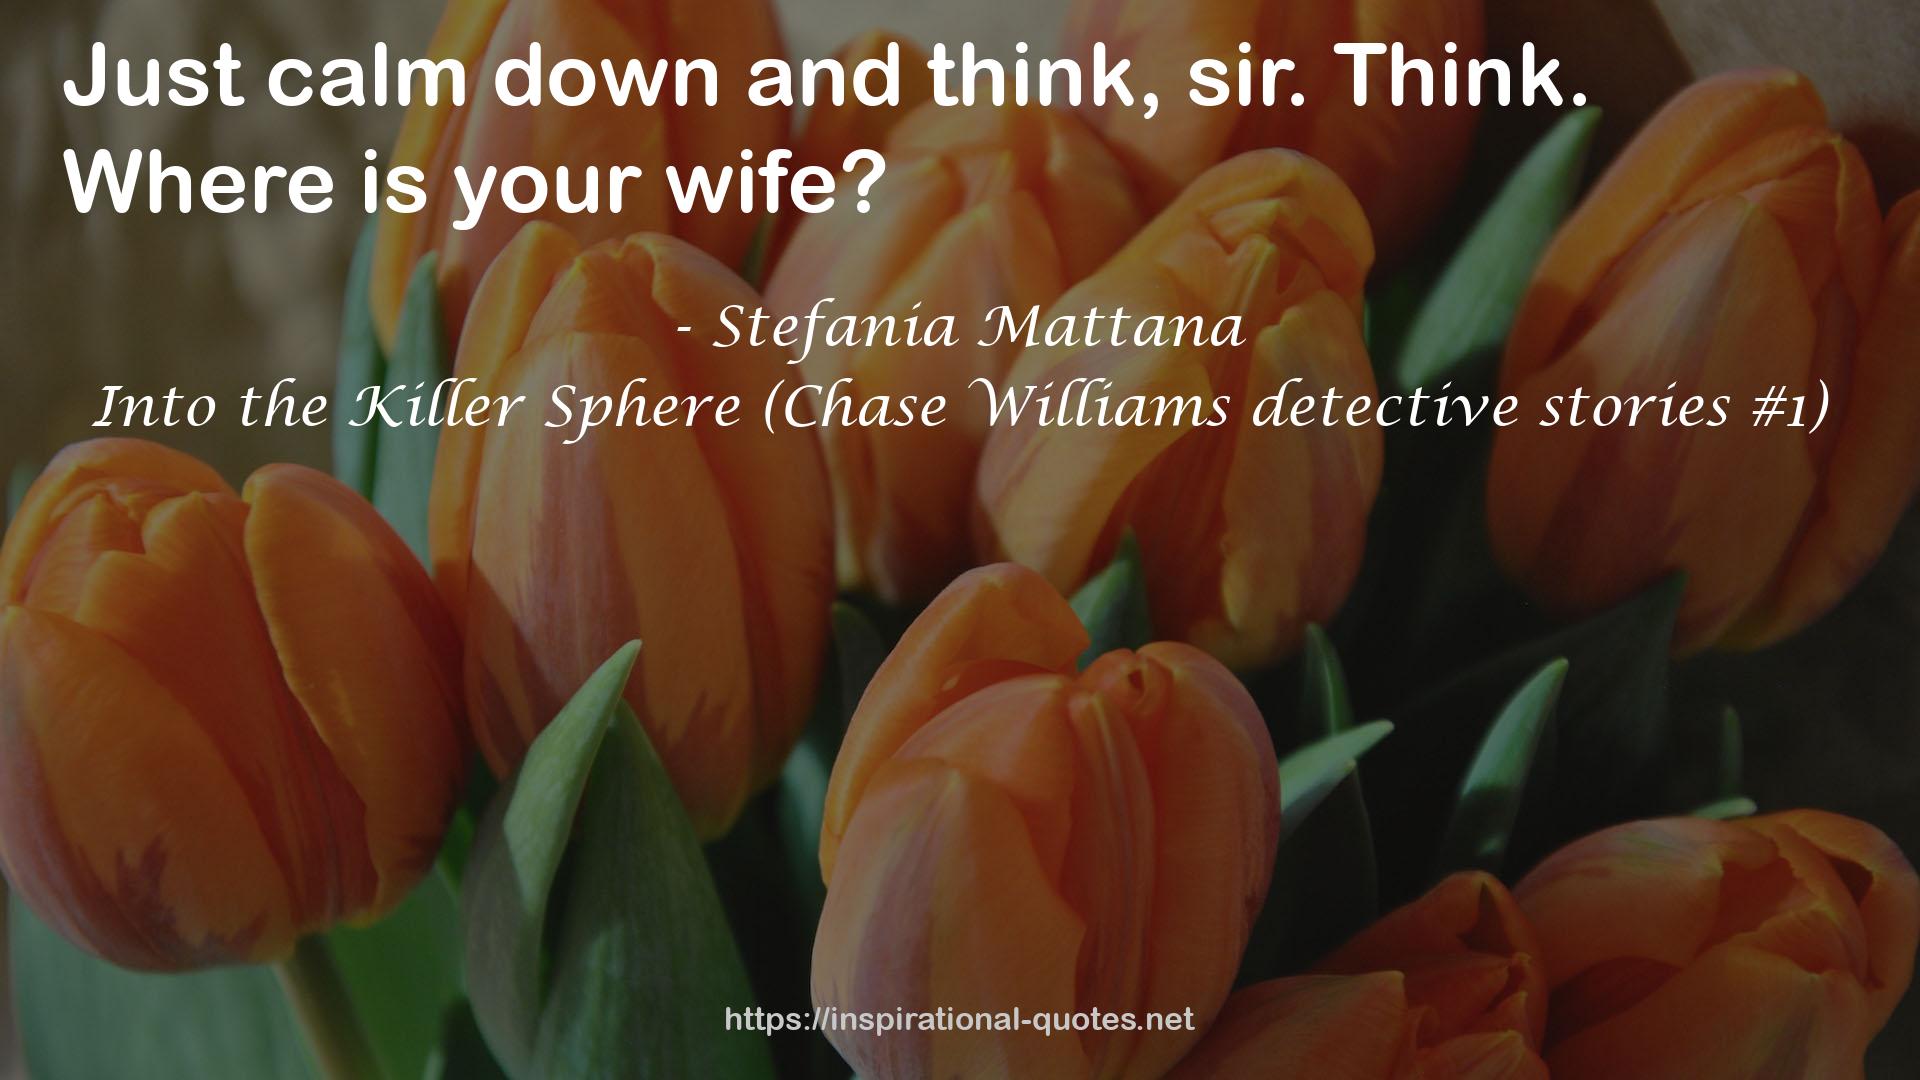 Into the Killer Sphere (Chase Williams detective stories #1) QUOTES